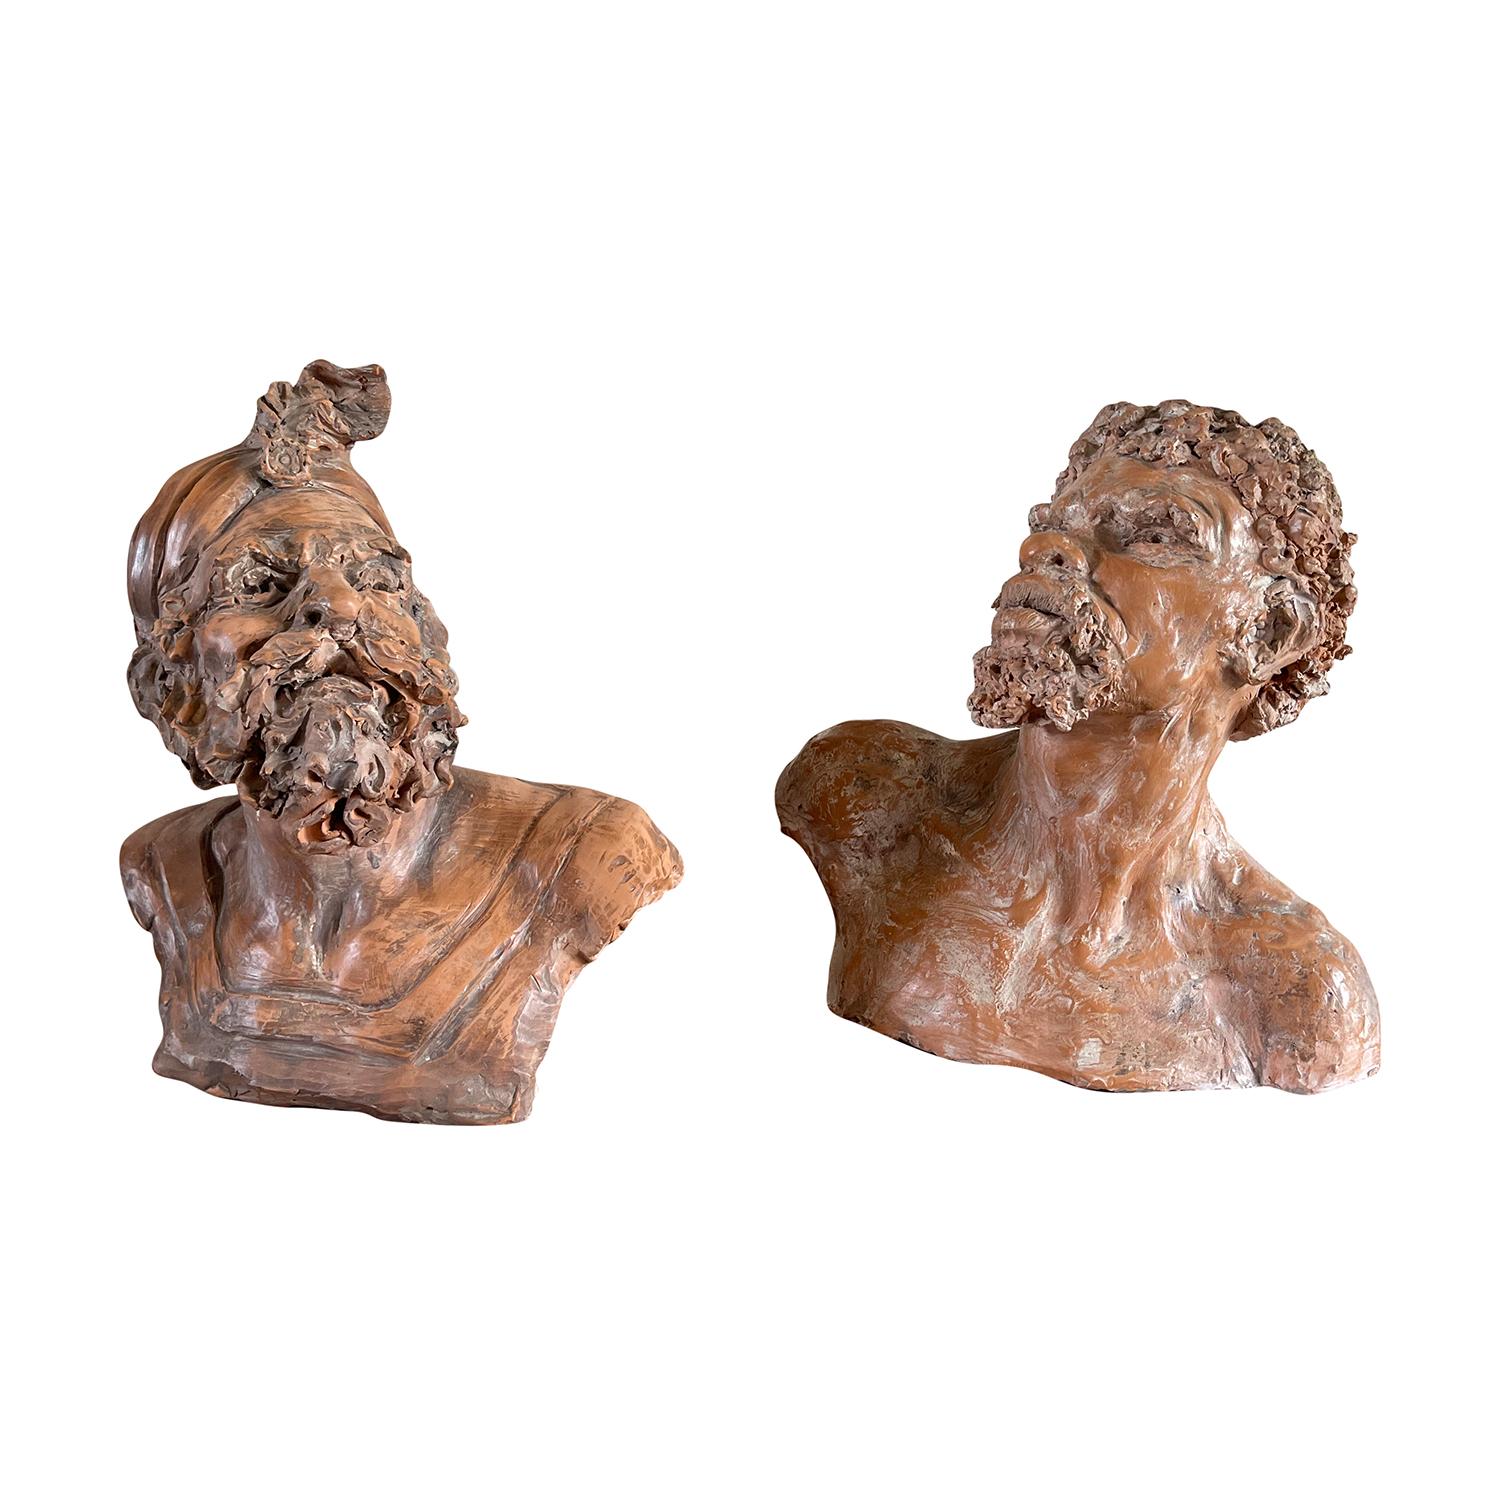 Hand-Crafted 19th Century French Antique Pair of Terra Cotta Orientalist Busts For Sale